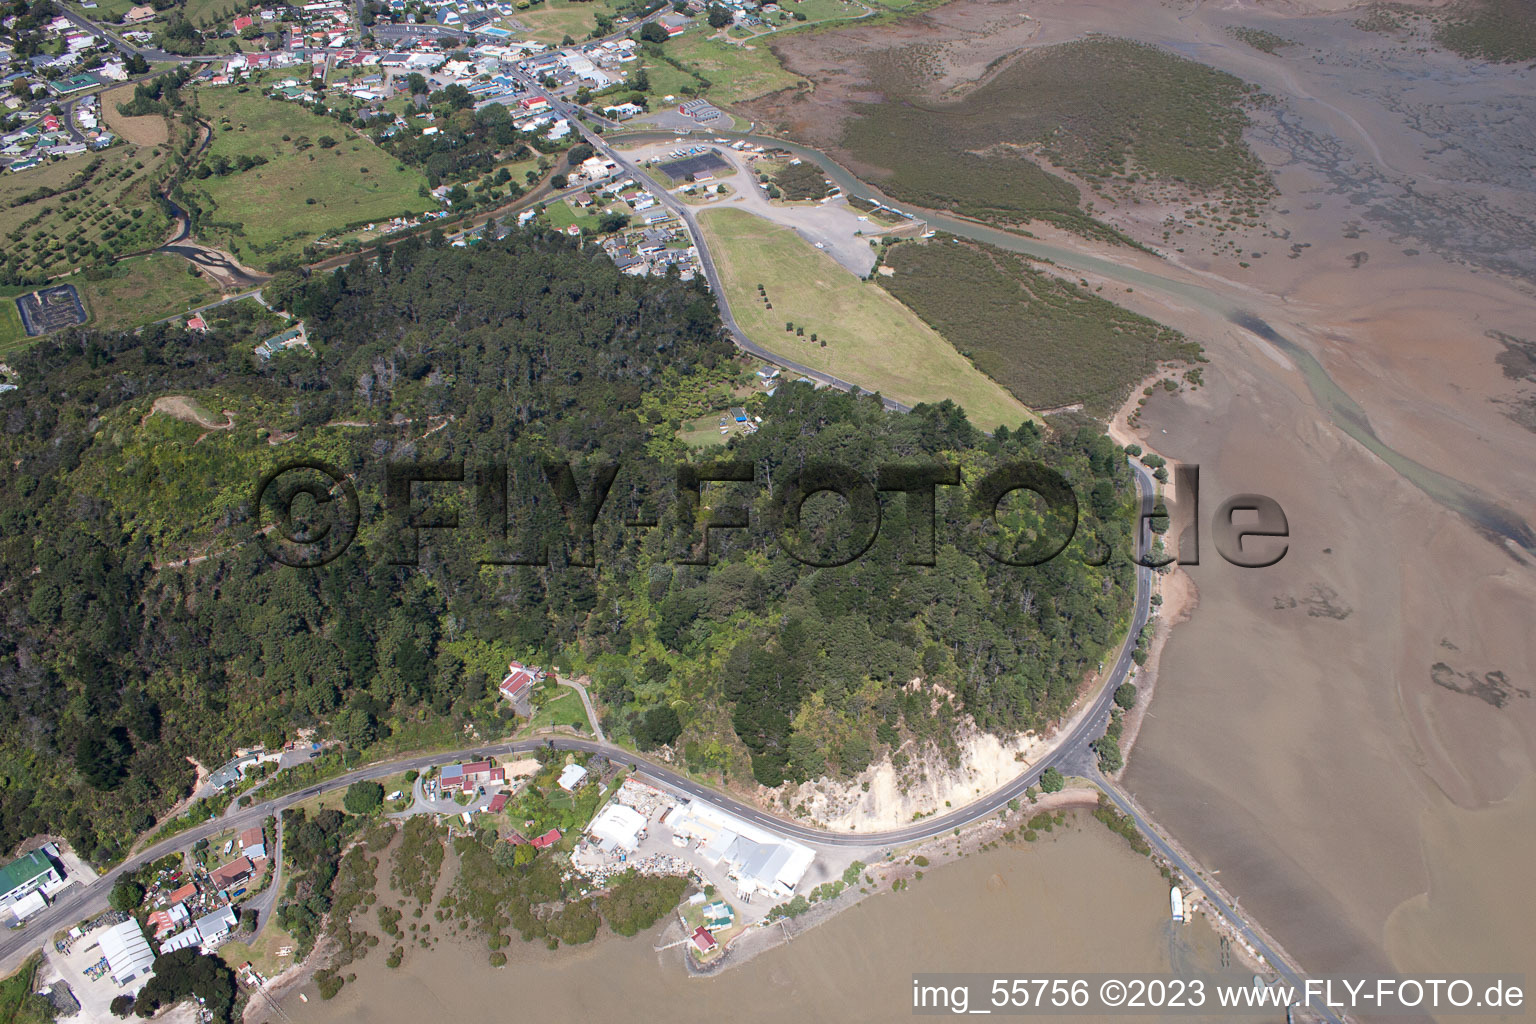 Coromandel in the state Waikato, New Zealand from above